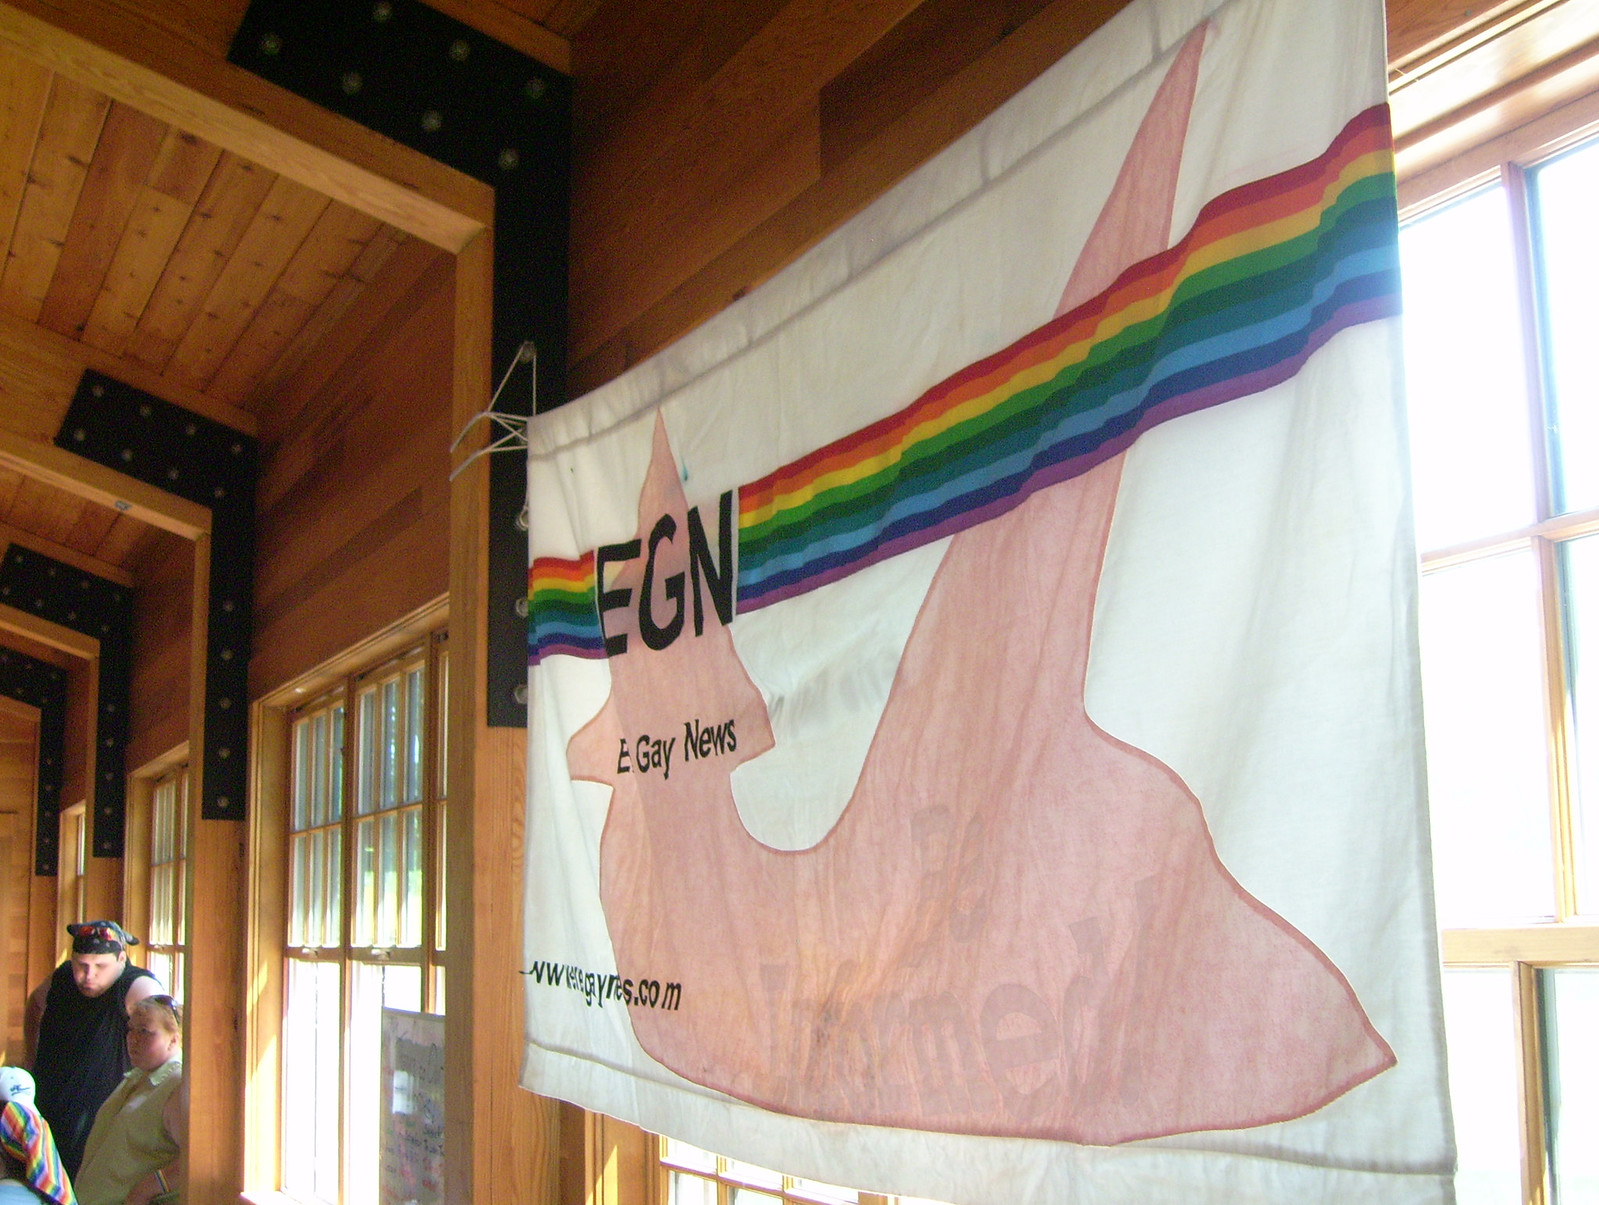 Erie Gay News banner, Photo by James von Loewe (who also made the banner.)